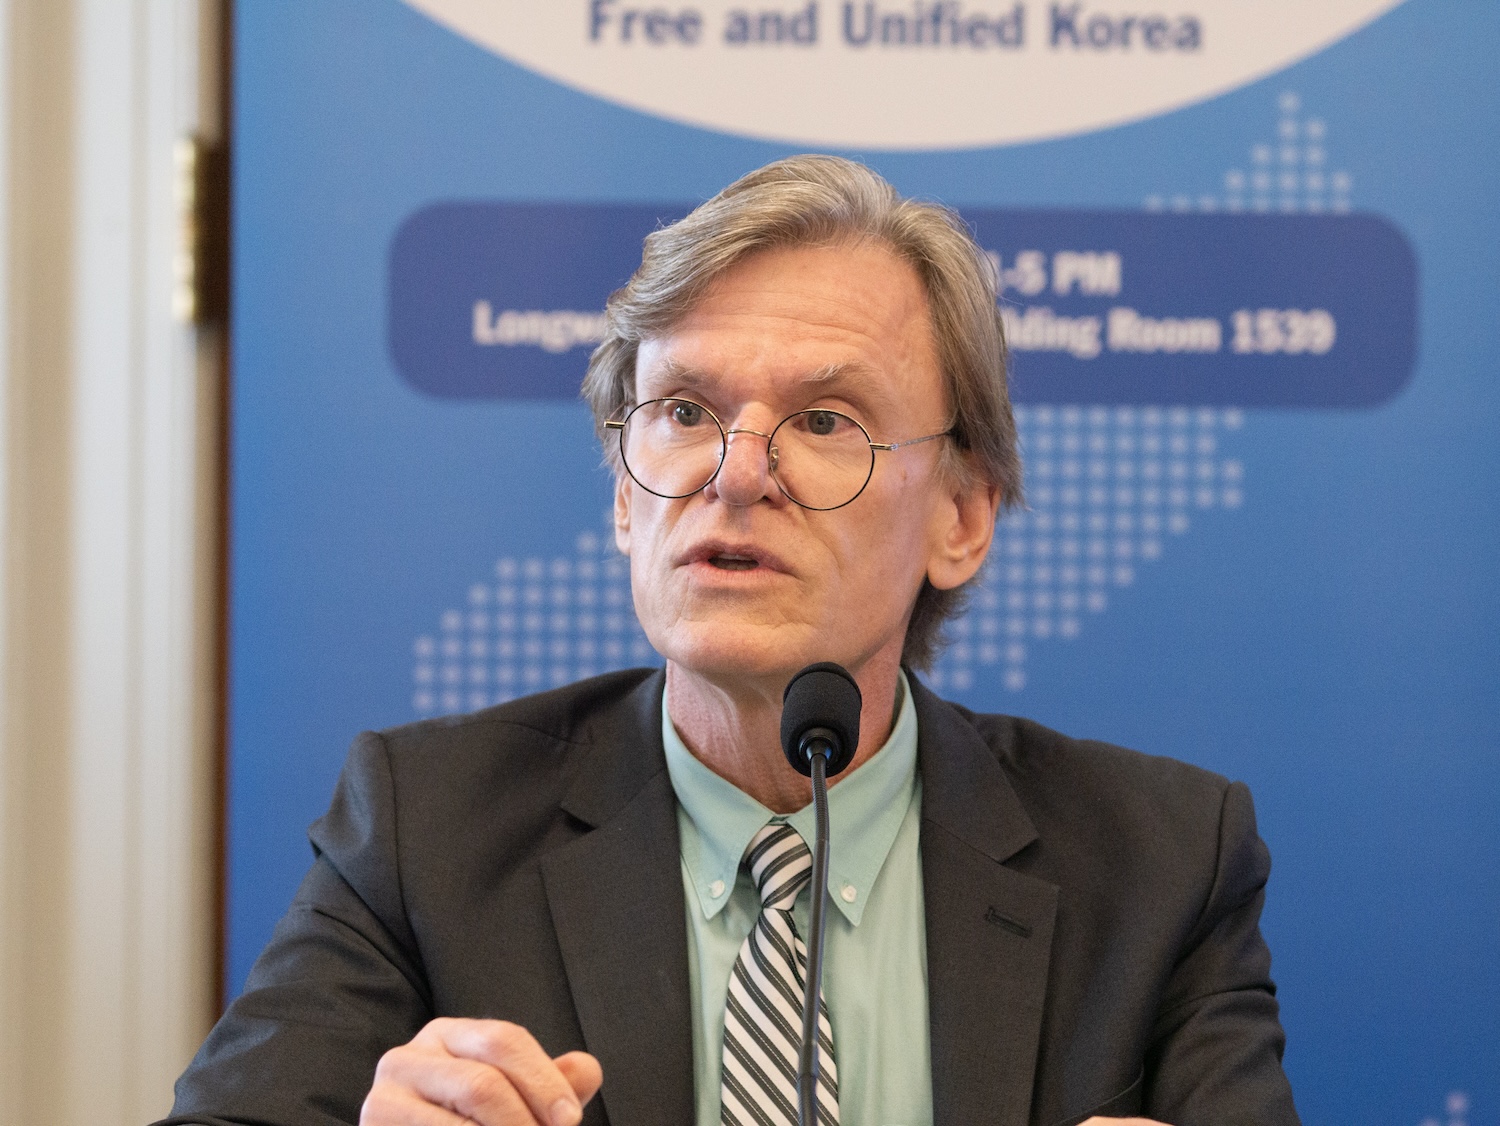 At the International Forum on One Korea, a man with glasses and gray hair speaks into a microphone. With a blue banner in the background, he stands confidently in his dark suit, green shirt, and striped tie advocating for U.S. support for a unified Korea.